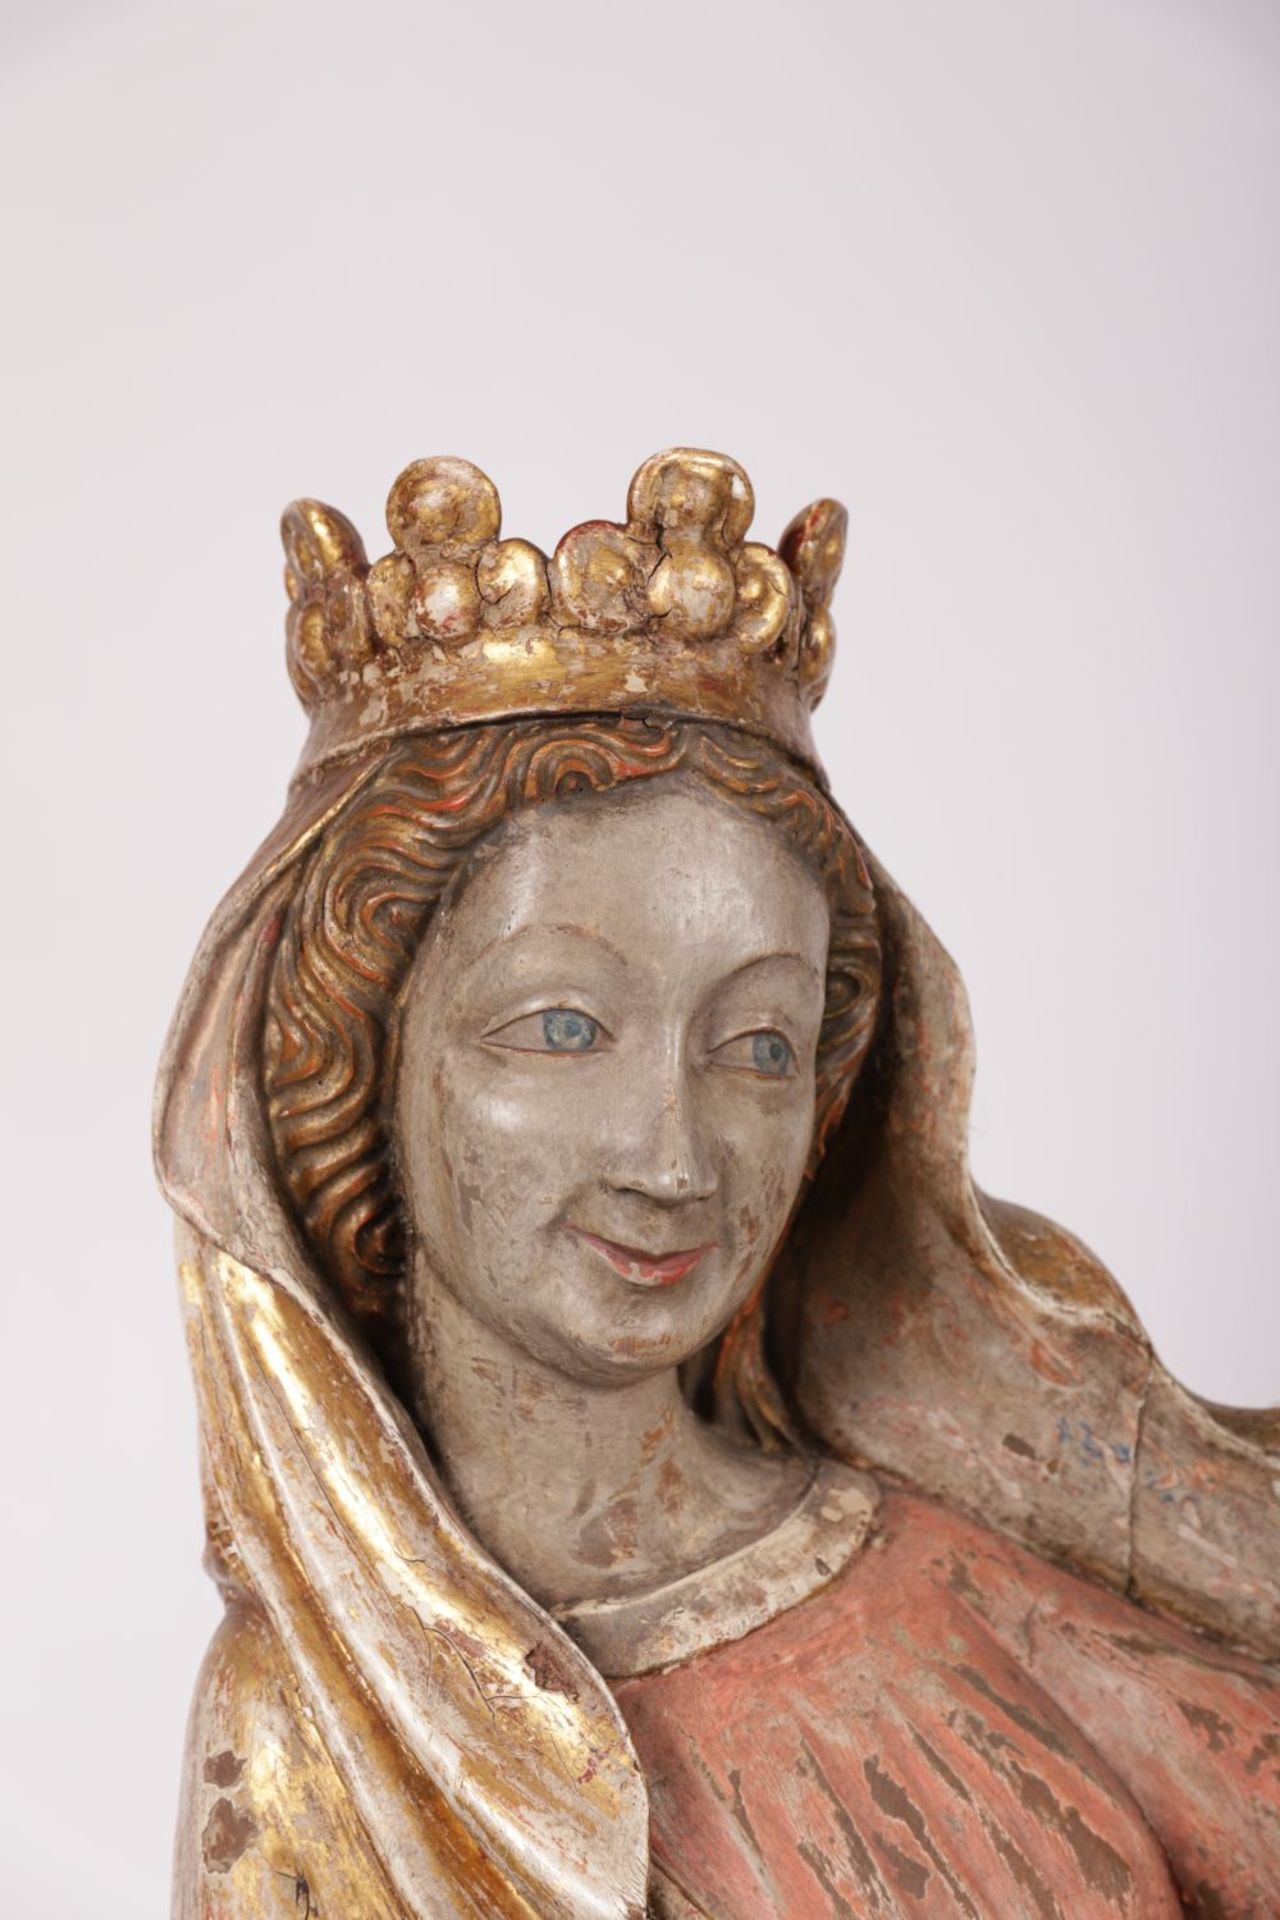 LARGE 18/19TH-CENTURY GERMAN POLYCHROME STATUE - Image 2 of 4